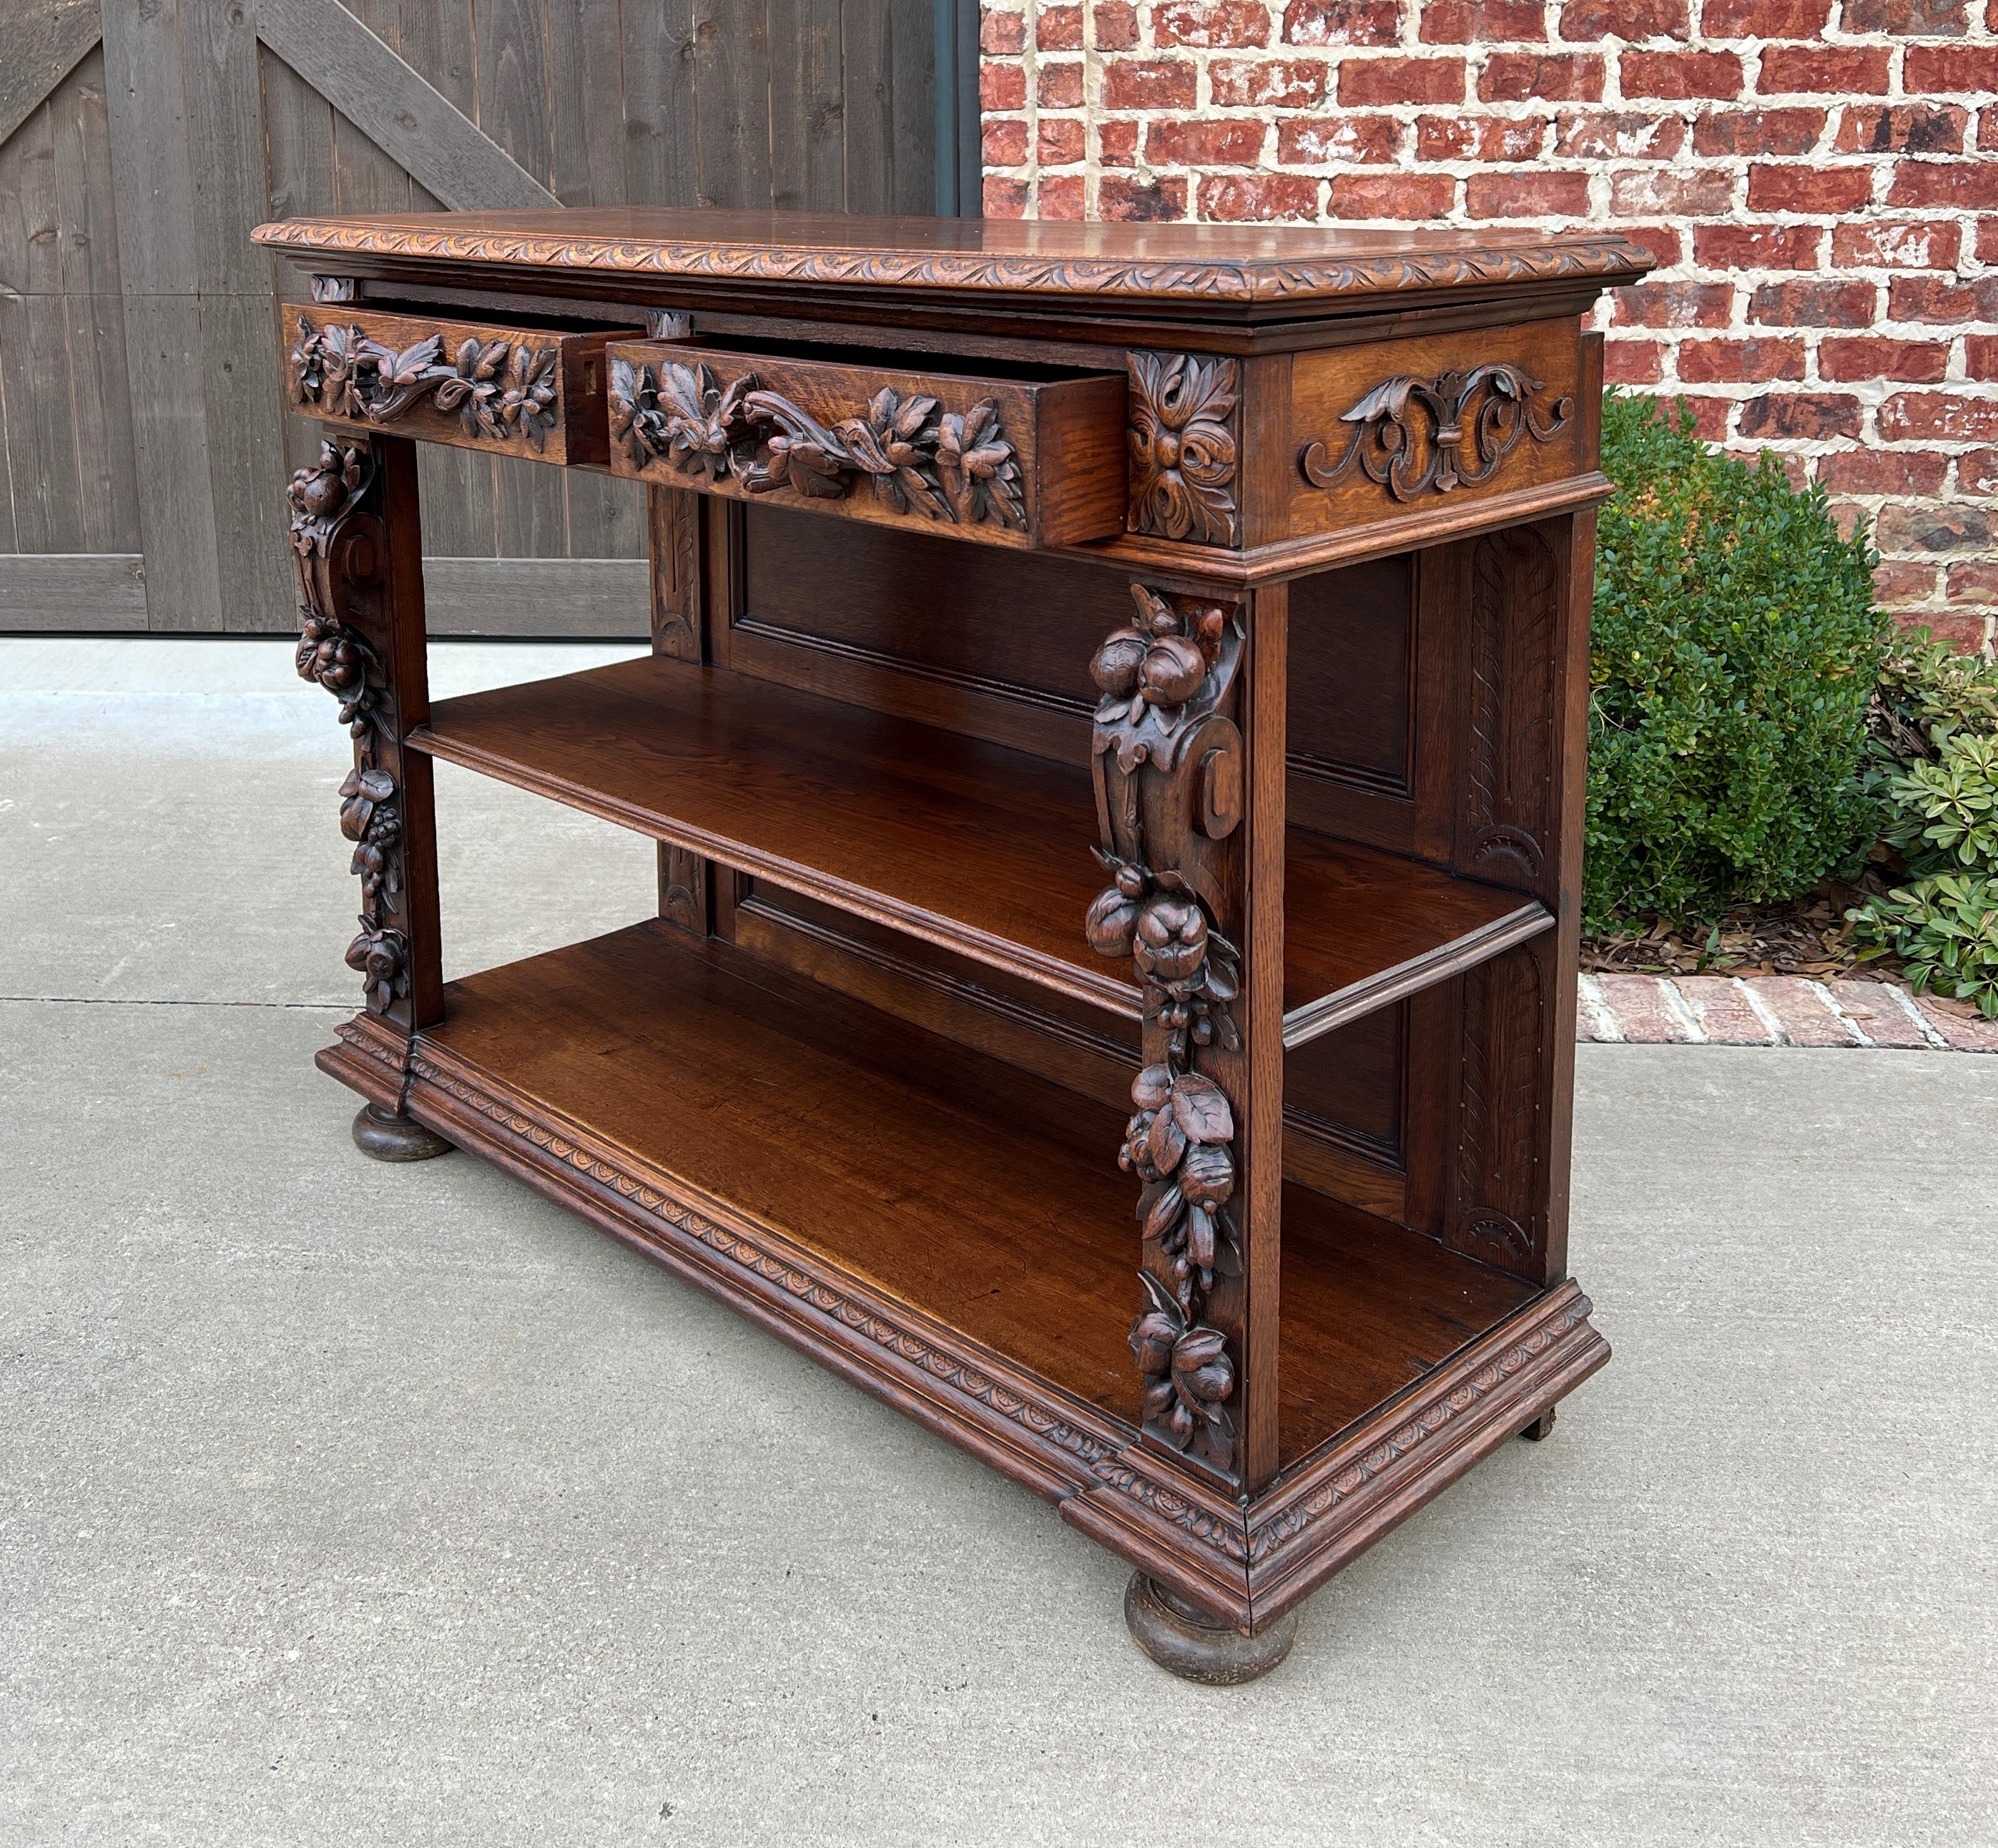 Antique French Server Sideboard Console Sofa Table 3-Tier Drawers Carved Oak 19C